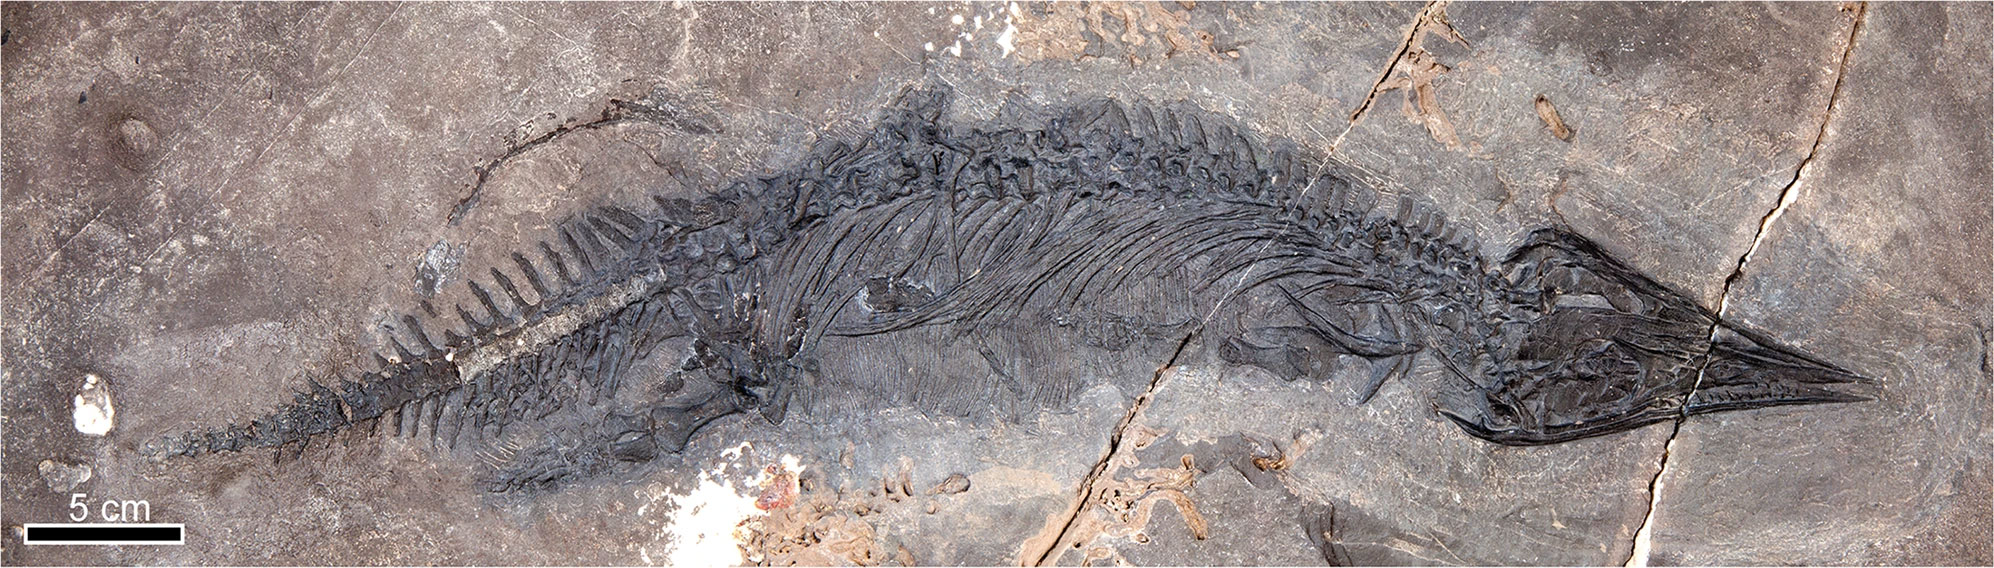 Photograph of a Triassic thalattosaurid from the Keku Islands, Alaska. The specimen is a relatively complete animal with a triangular head pointed to the right. The spine forms a slight arch and the back legs look flipper-like. The tail tapers toward the left. A 5 centimeter scale is in the corner of the photo. The specimen is dark brown to black and preserved in medium-brown rock.